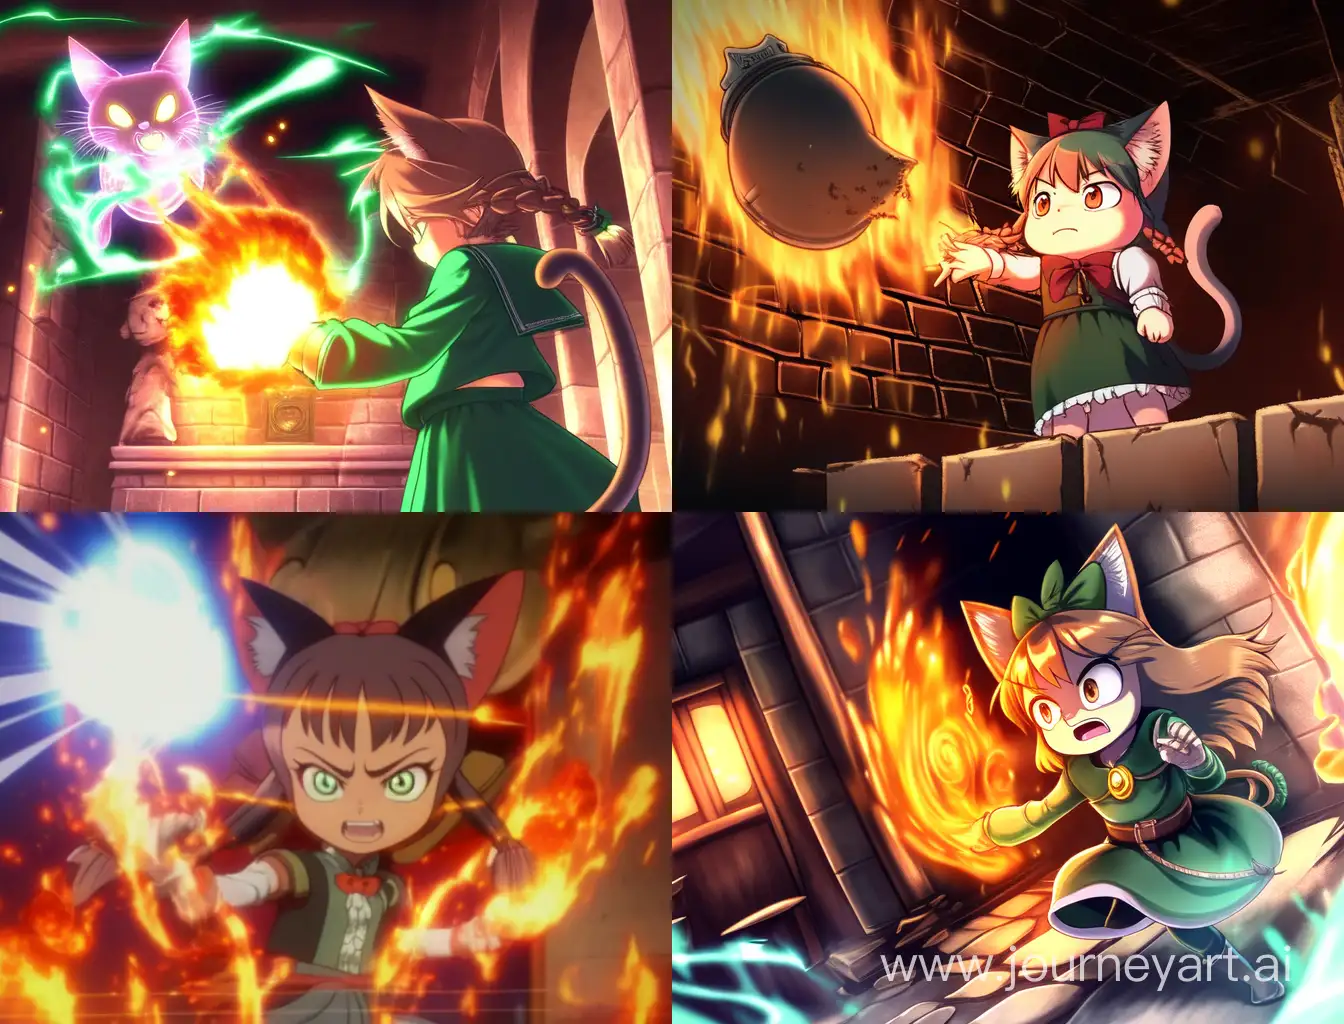 Courageous-Witch-Neko-Girl-Defends-Green-Village-from-Tsunami-with-Flame-Wall